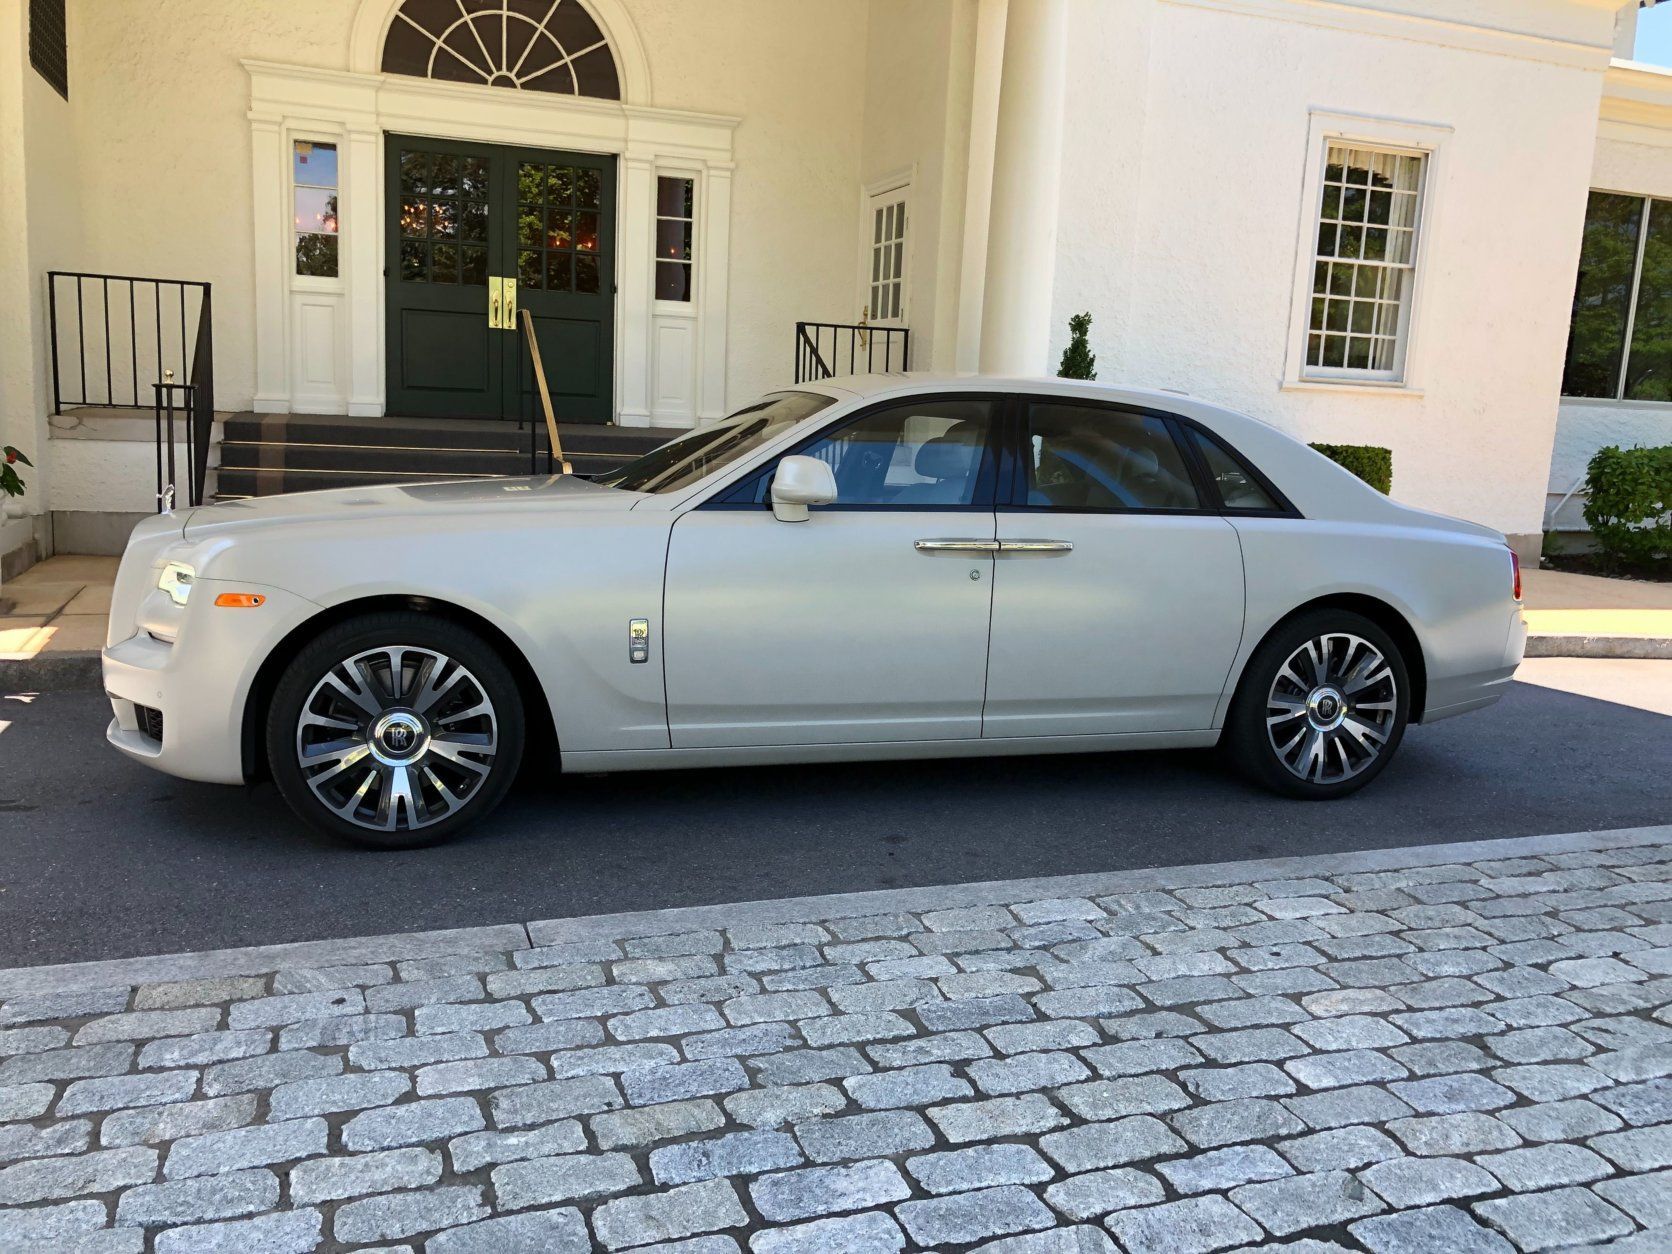 <p>Nothing else really has the same presence as a Rolls-Royce, and even the smaller Ghost stands out in the crowd. This Rolls is still a large car and sits high with a taller roof line.</p>
<p>The car is long and the coach doors with the front and rear door handles close together as a focal point.</p>
<p>Large 21-inch wheels adorn the sedan and the center cap with RR always stays upright.</p>
<p>Rolls-Royce allows you to customize most of the car. Paint color like the $20,700 Iced Selby Grey with an iced clearcoat does especially well in making a statement.</p>
